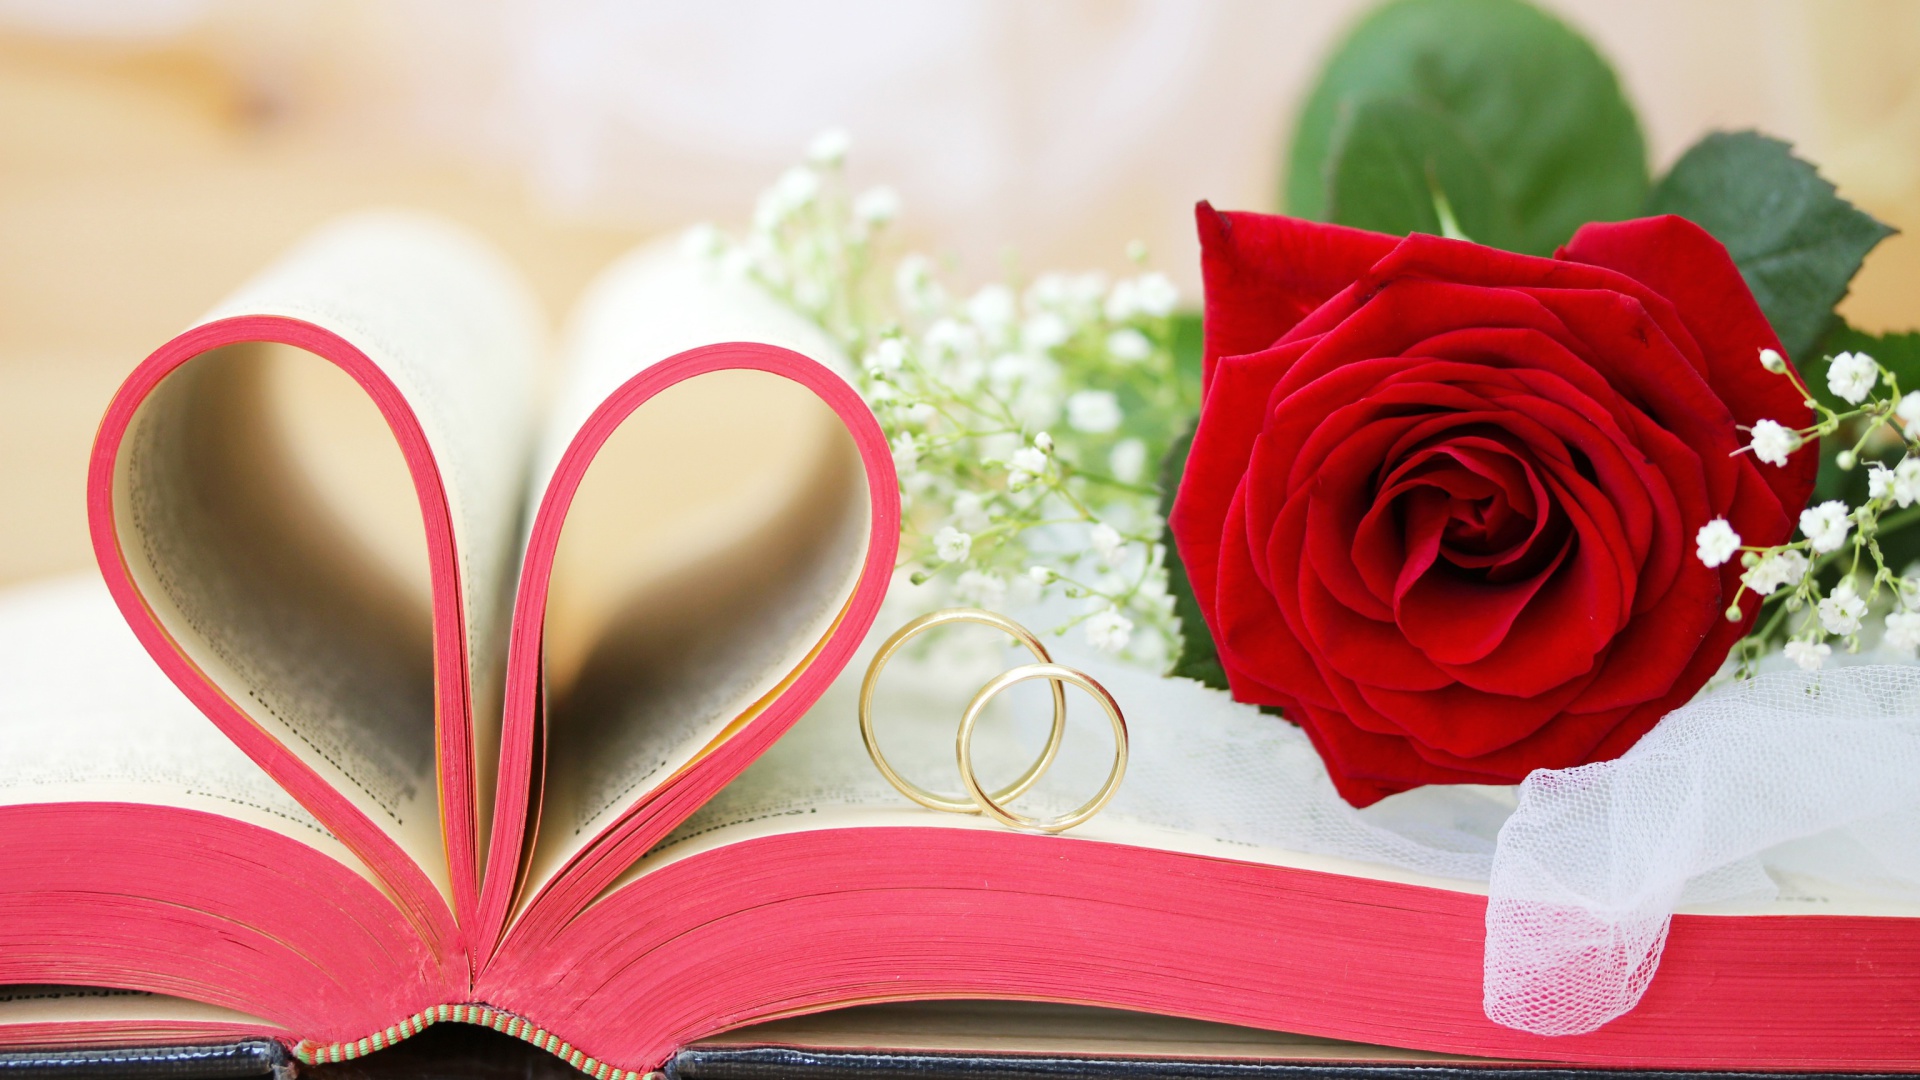 Wedding rings and book wallpaper 1920x1080